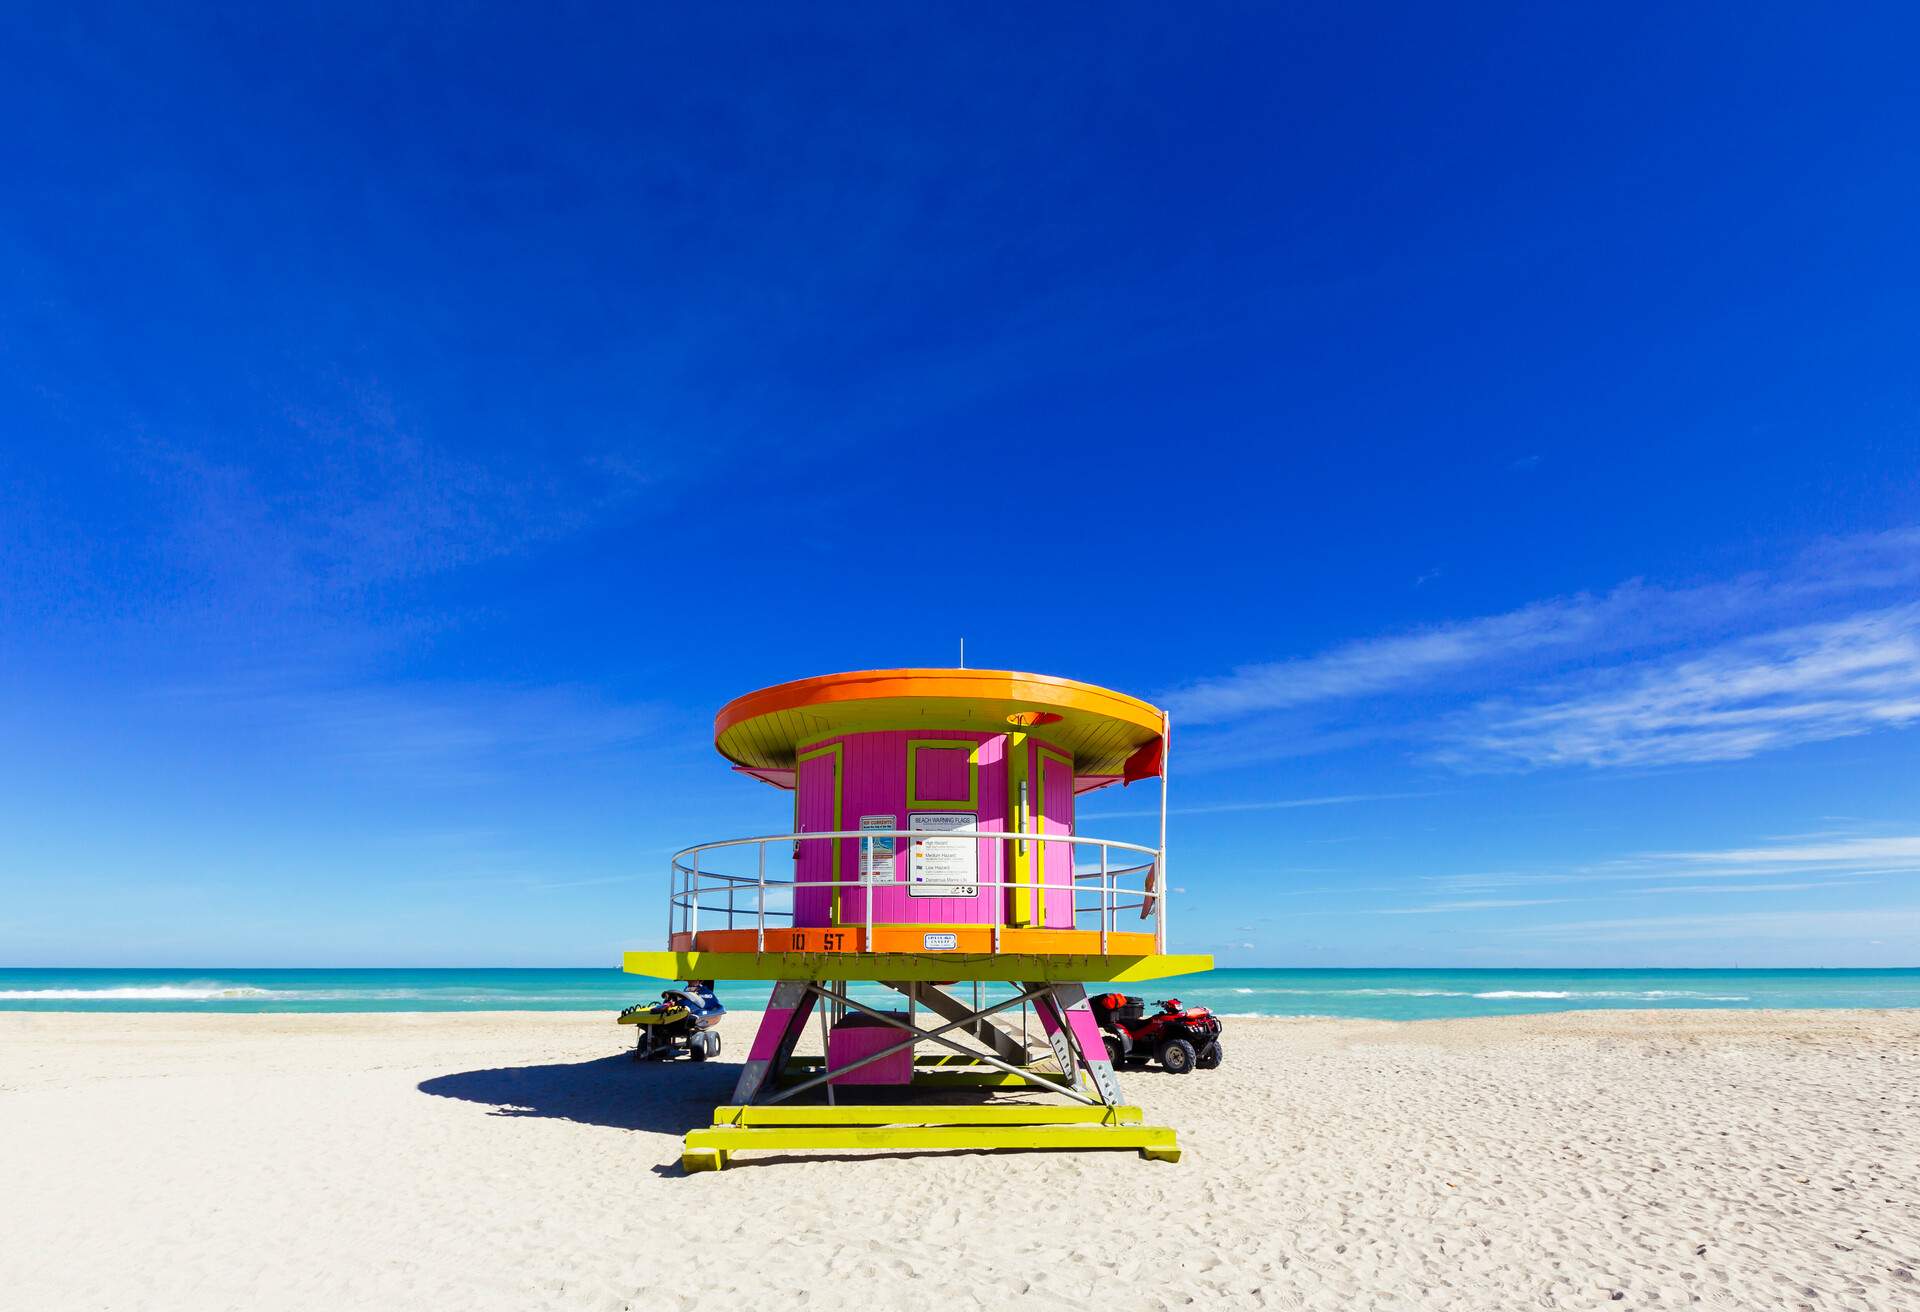 A lifeguard tower painted in vibrant colours nestled in an empty sandy beach against the clear blue sky.